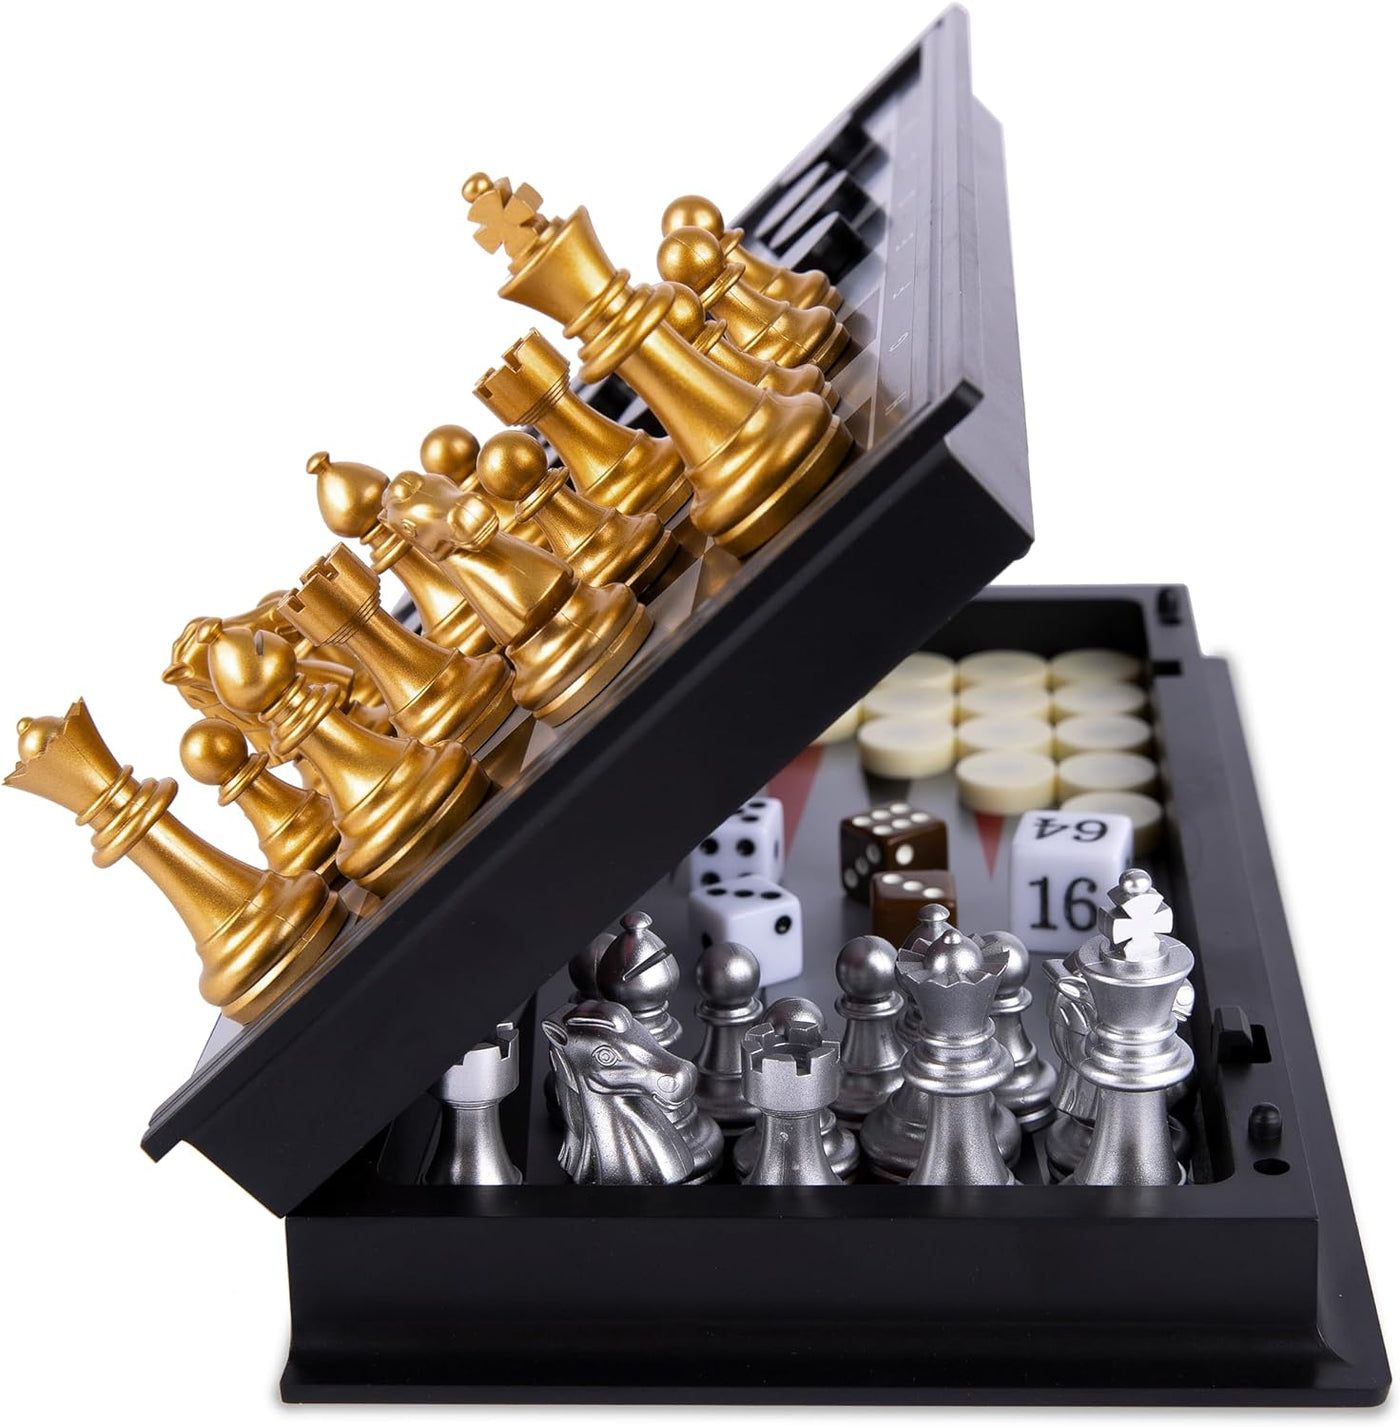 3 in 1 Magnetic Travel Chess Set - Portable Chess, Checkers, Backgammon Set - 9 Inch Magnetic Chess Board for Road Trips